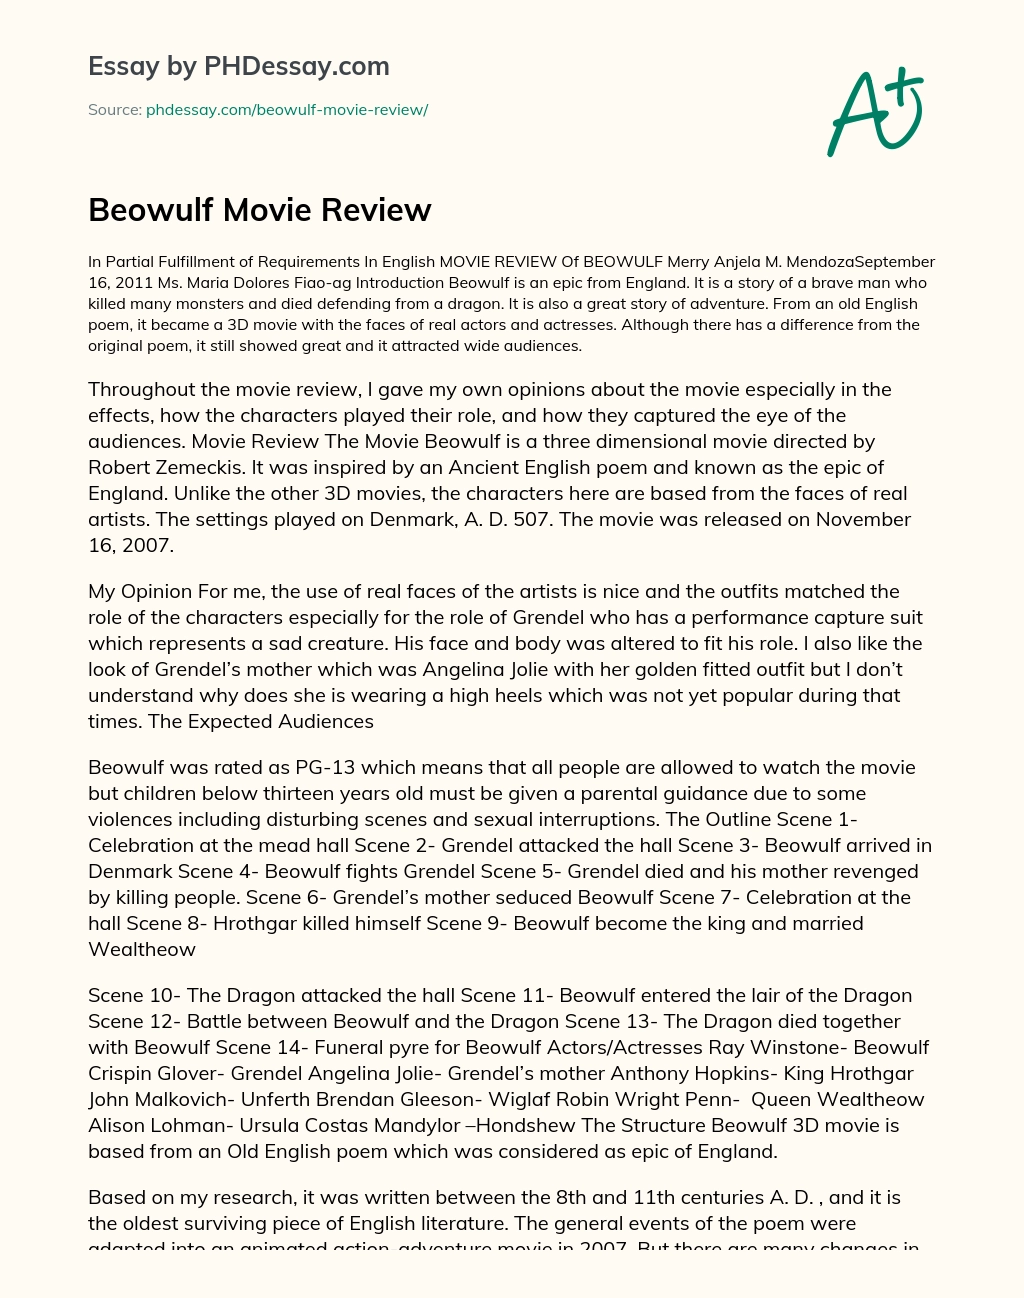 Beowulf Movie Review essay